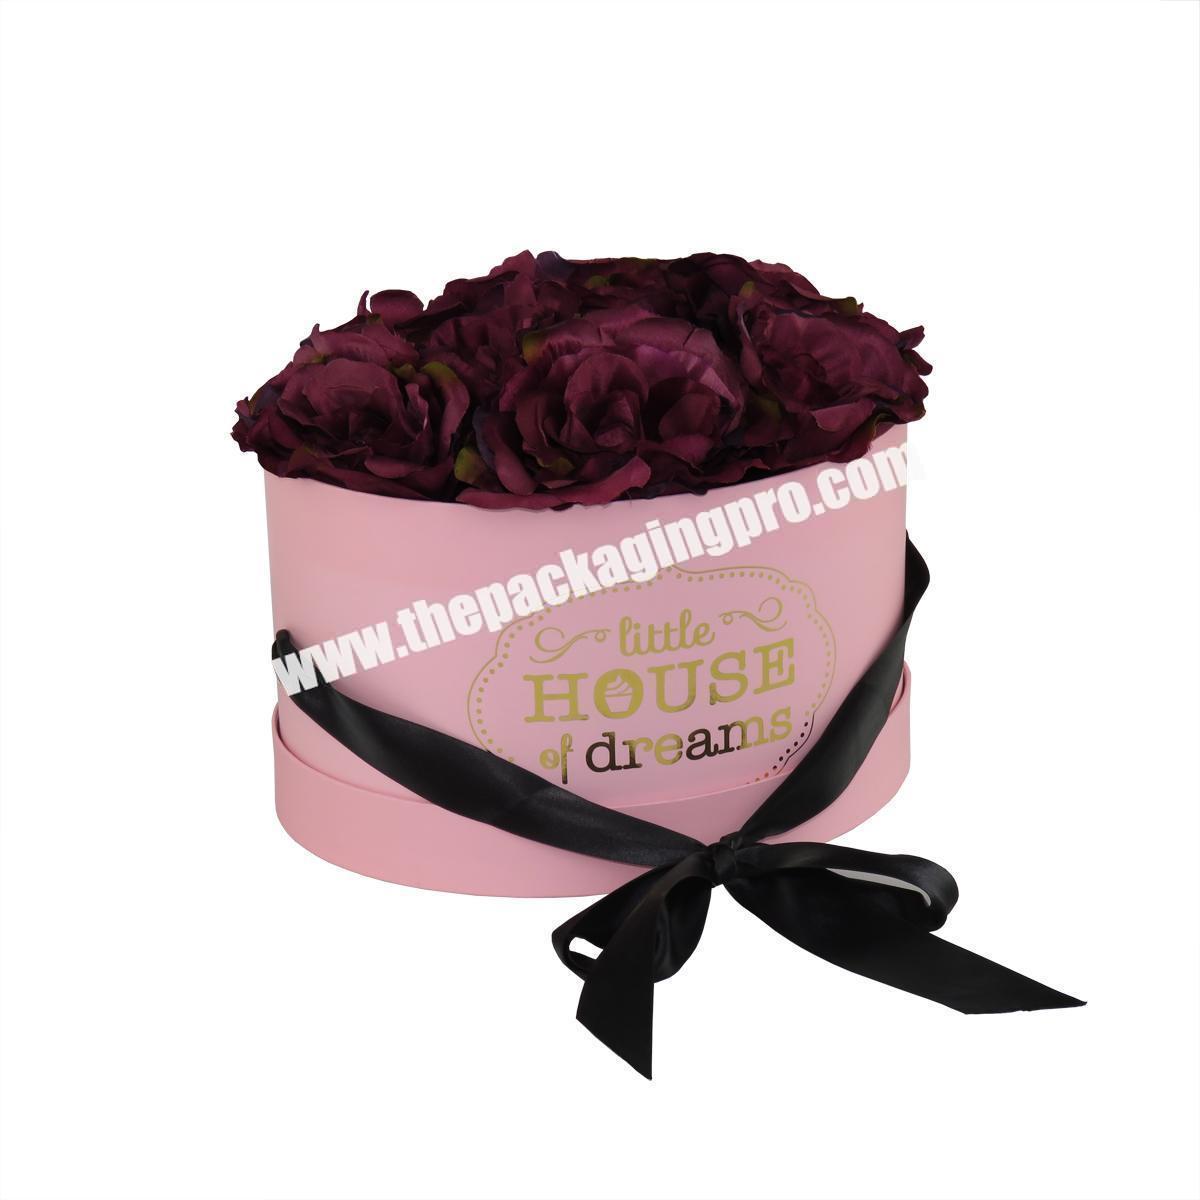 Wholesale Luxury Rose Delivery Round Packaging Box Shipping Mom Boxes For Flowers Artificial Roses